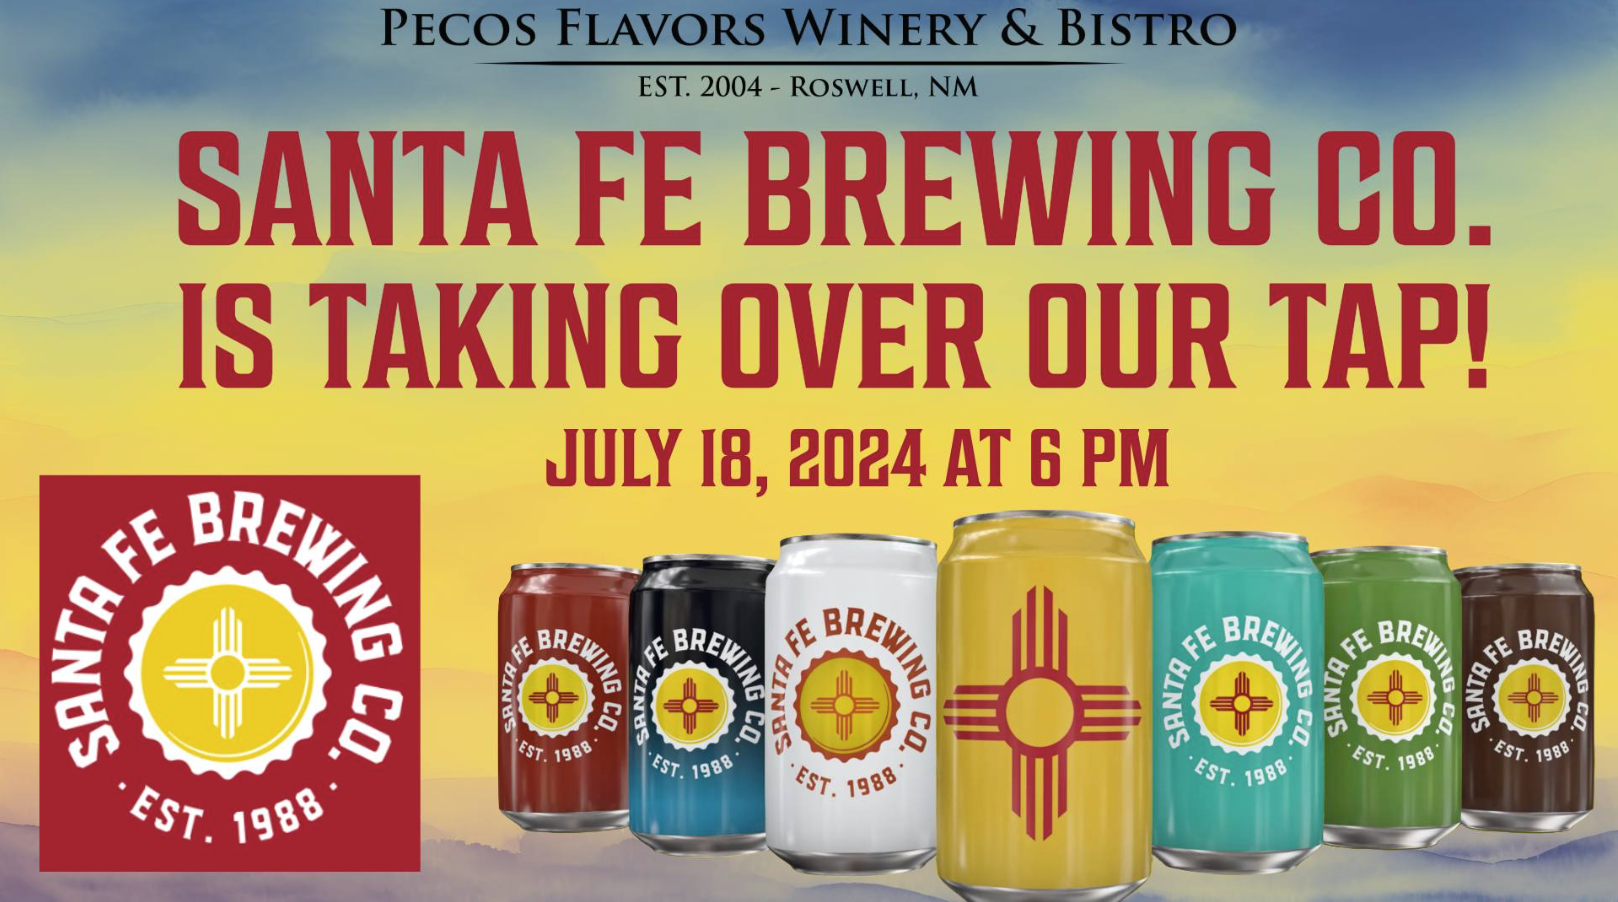 Santa Fe Brewing Co with dates and times taking over Pecos Flavors Winery + Bistro